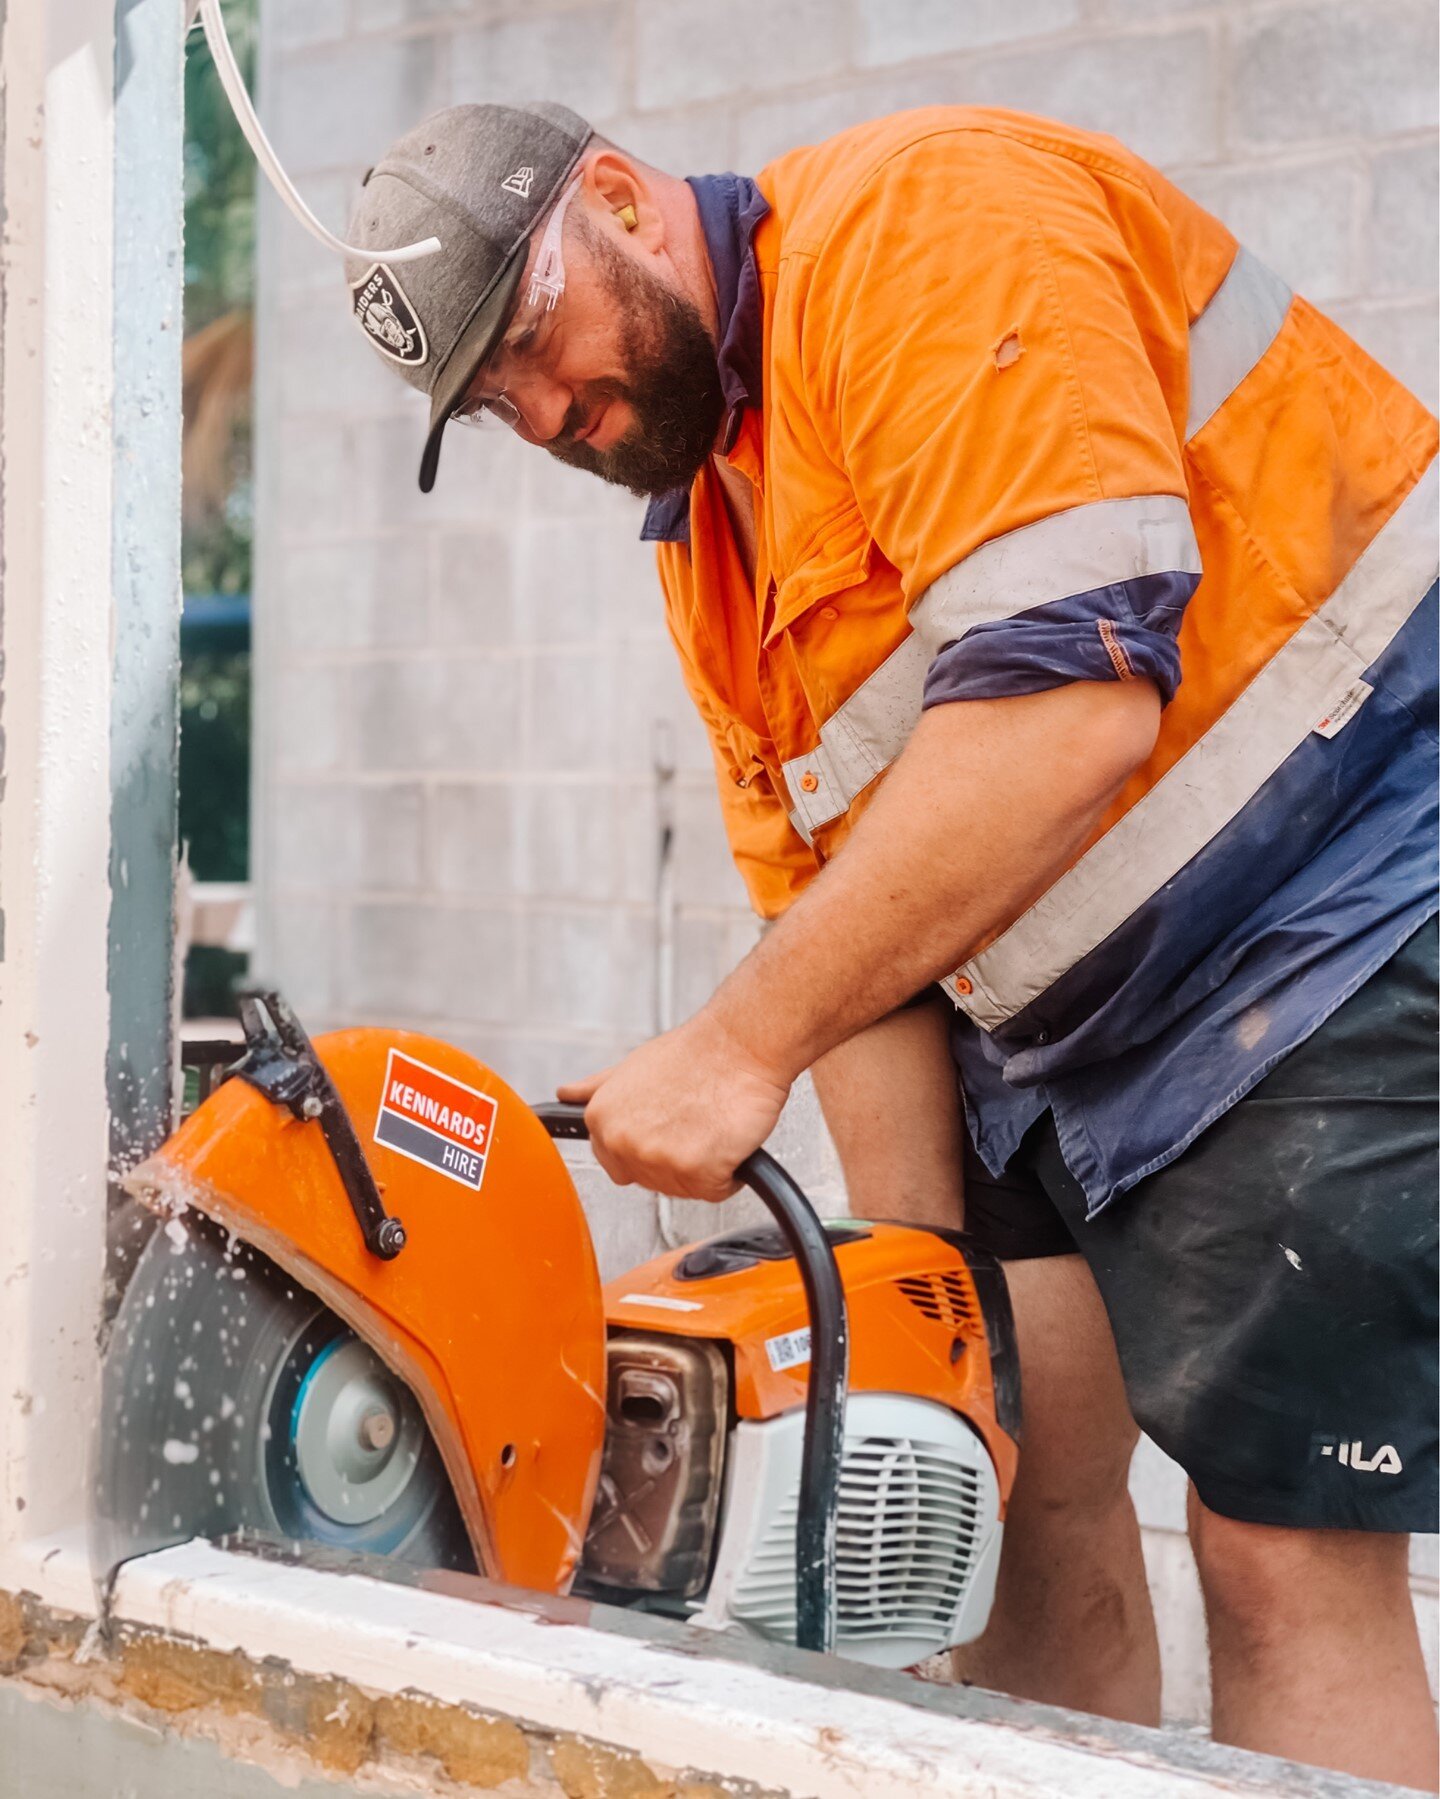 And today we are back to business!
.
.
.
.
.
#mondaymotivation #fredbuild #construction #tradies #hivis #builder #powertool #northernterritory #ntbuilder